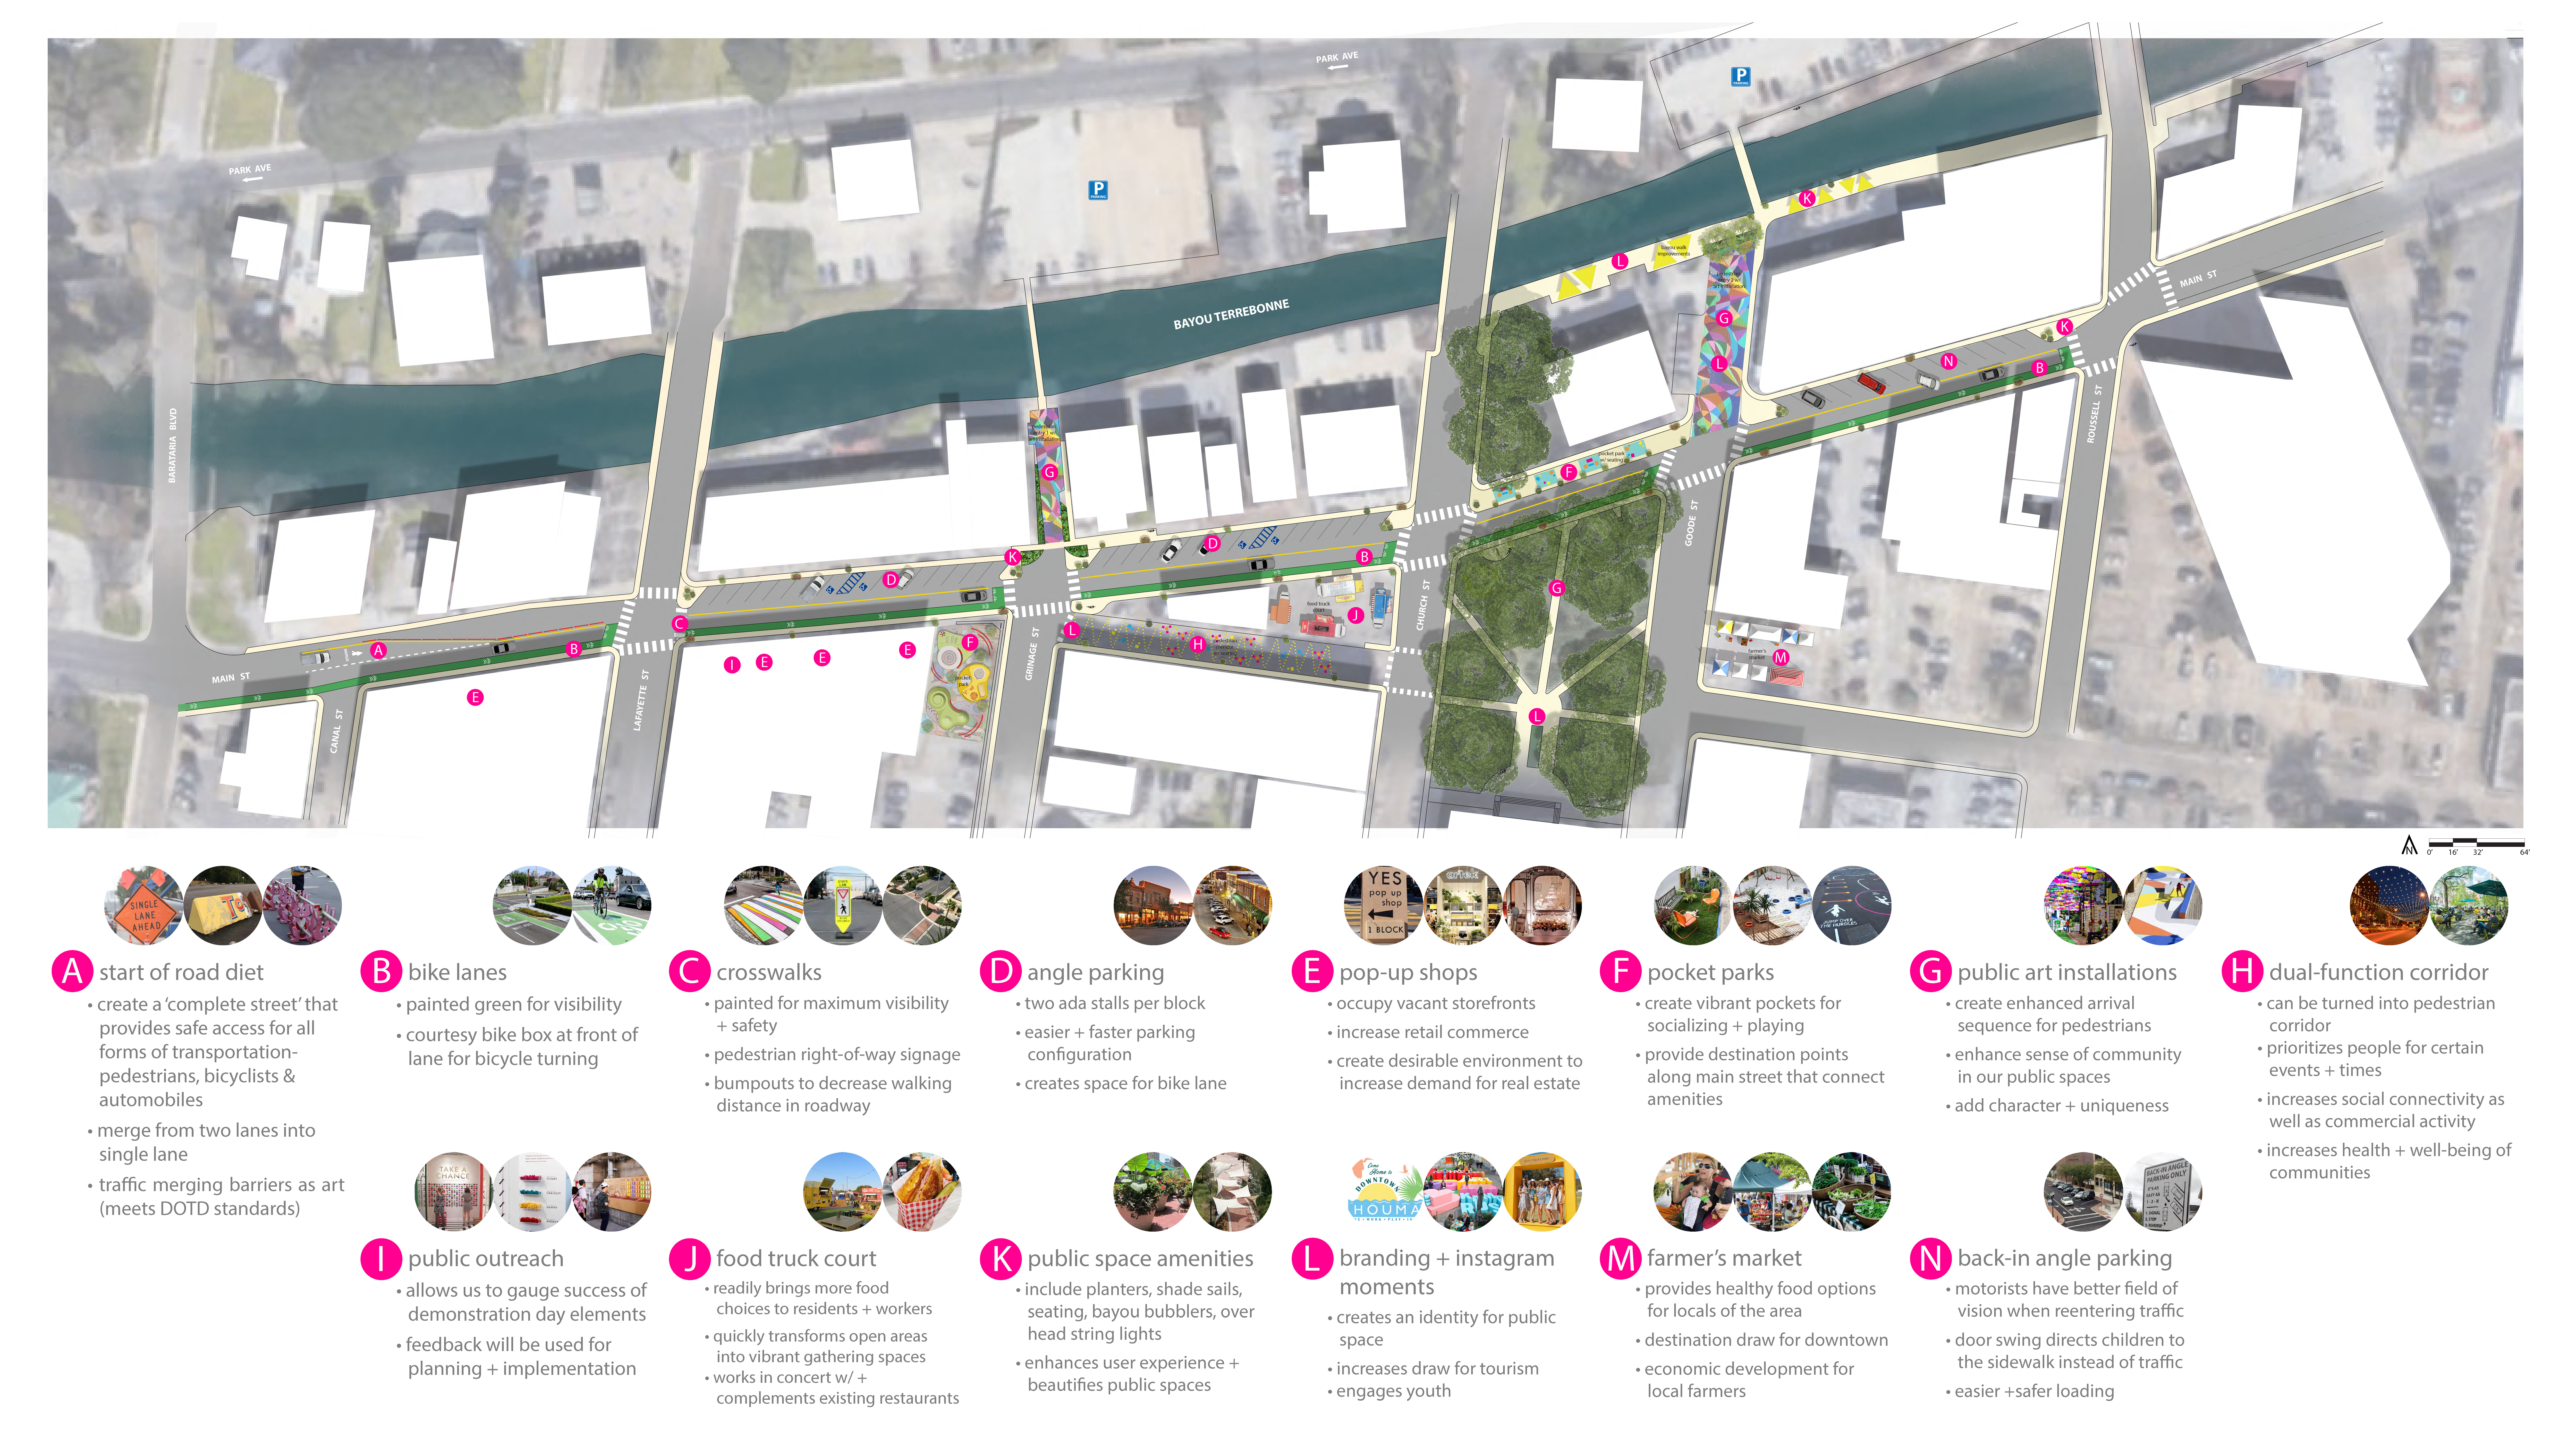 Downtown Demonstration Day - Site Plan